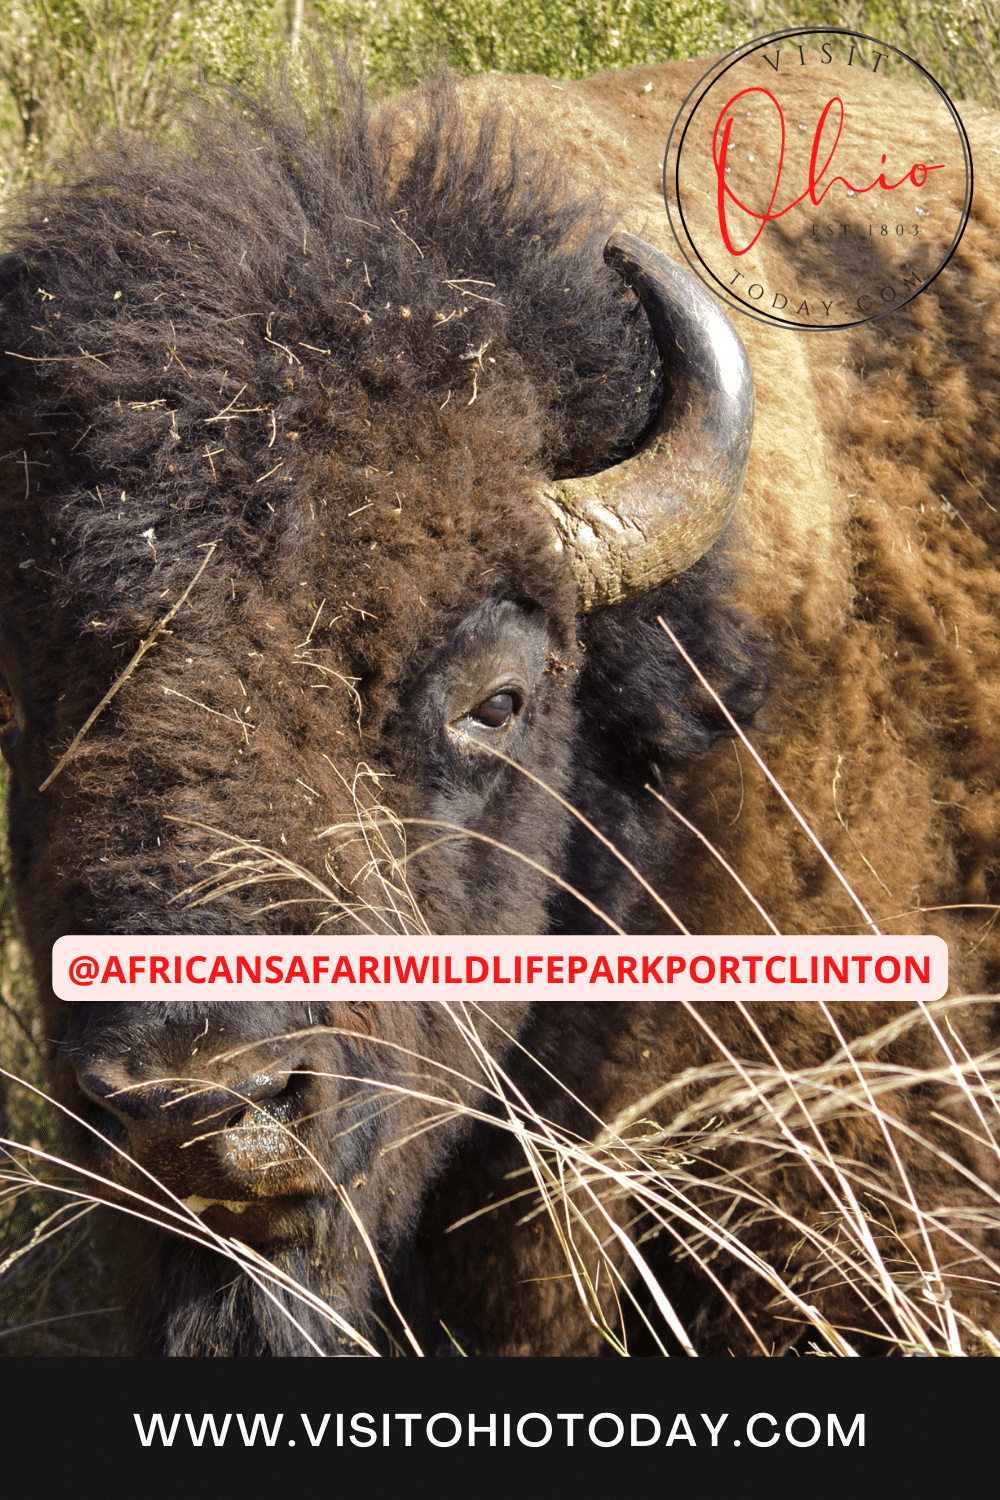 Close up photo of a bison with a text overlay saying African Safari Wildlife Park Port Clinton